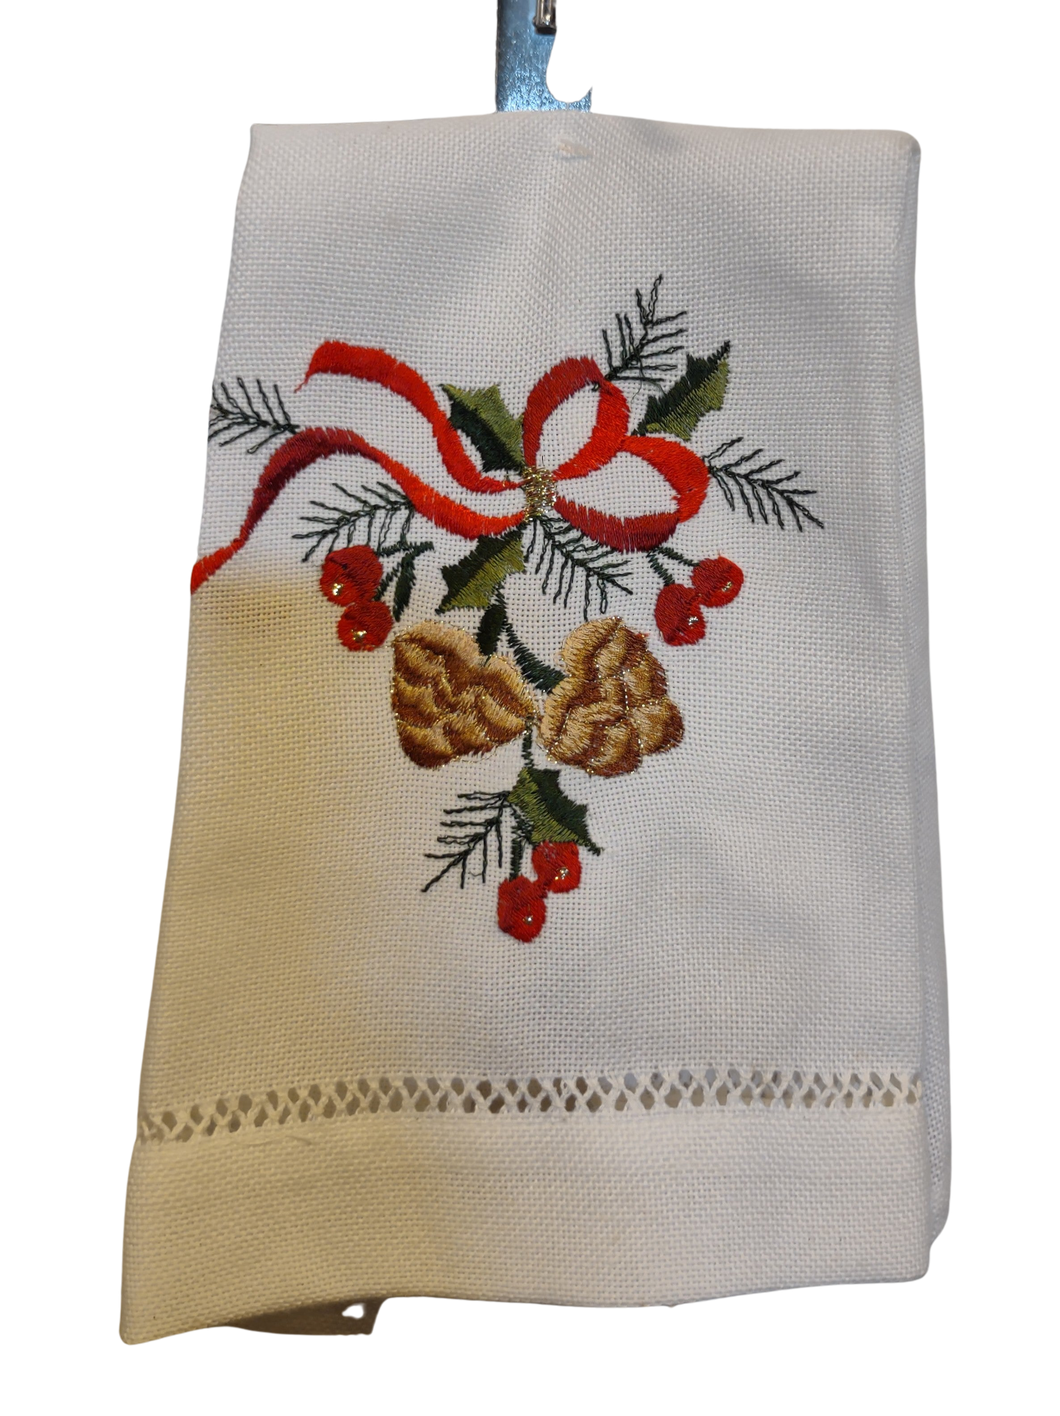 White Knitted Kitchen Towel with Red Ribbon/Red Berries/Pine Cones 12